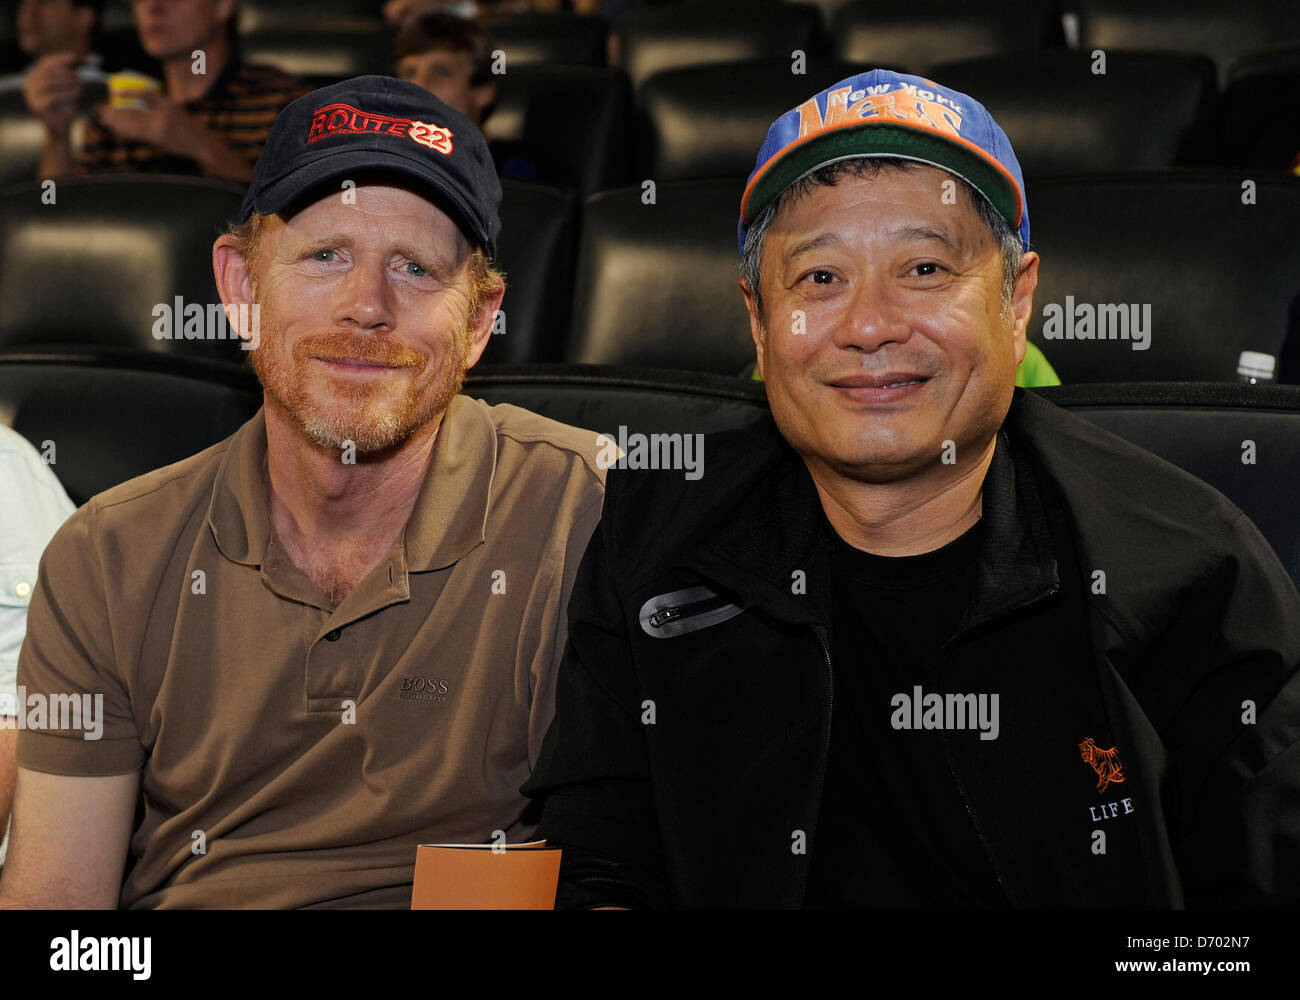 Ron Howard and Ang Lee are seen in the stands at the Mets vs. Atlanta Braves game held at Citifield Stadium in Queens New York City, USA - 26.08.11 C Stock Photo